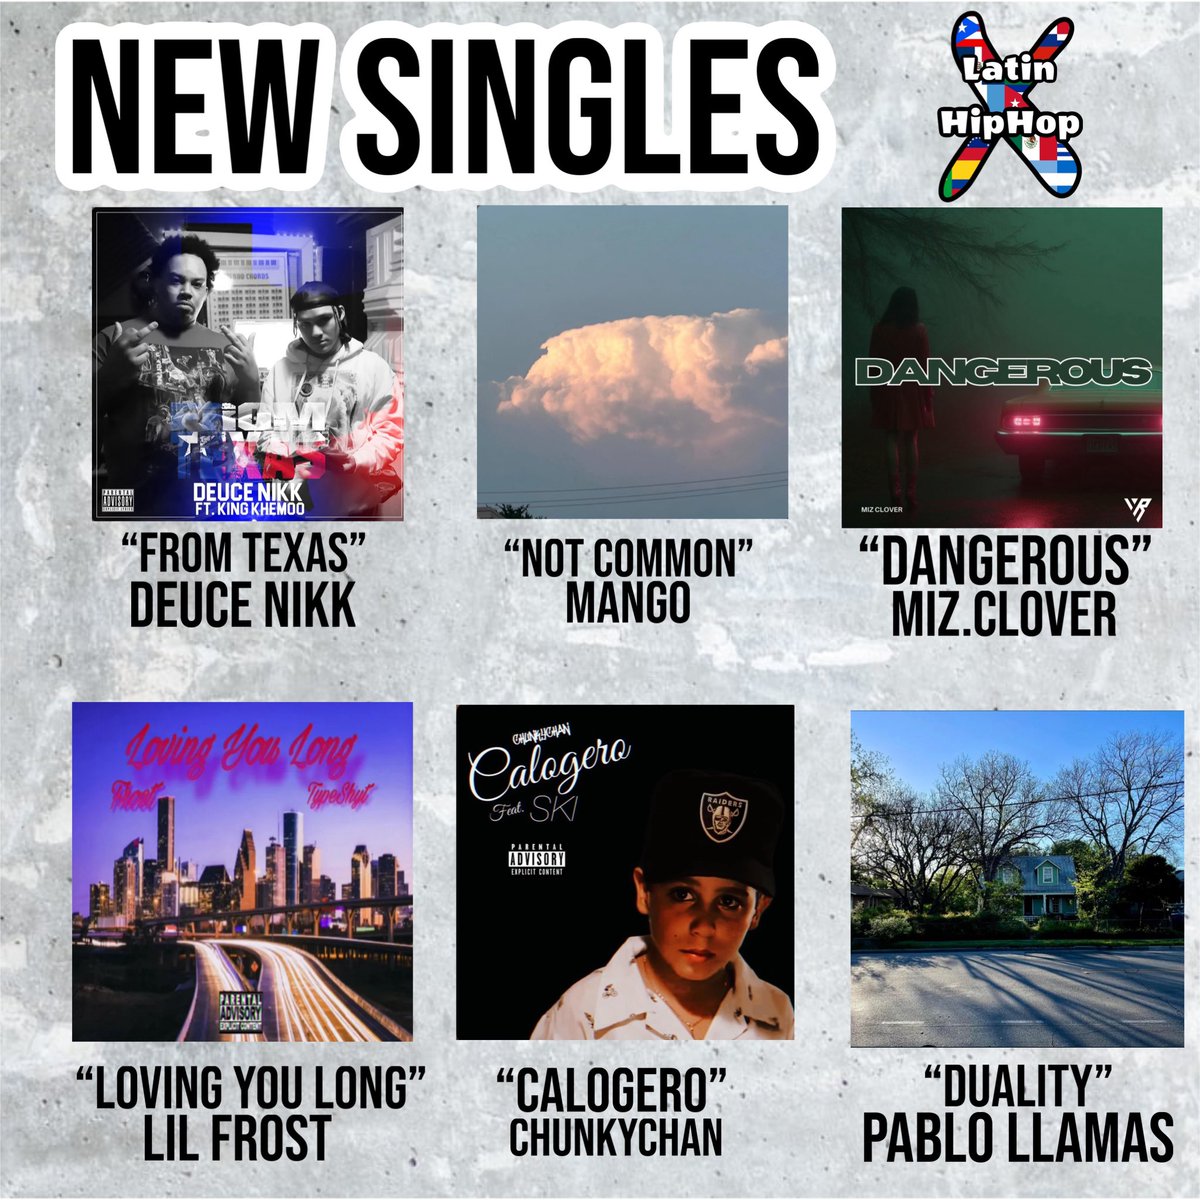 New singles dropped last week‼️
All available on all streaming services ‼️

#latinxhiphop #newsingles